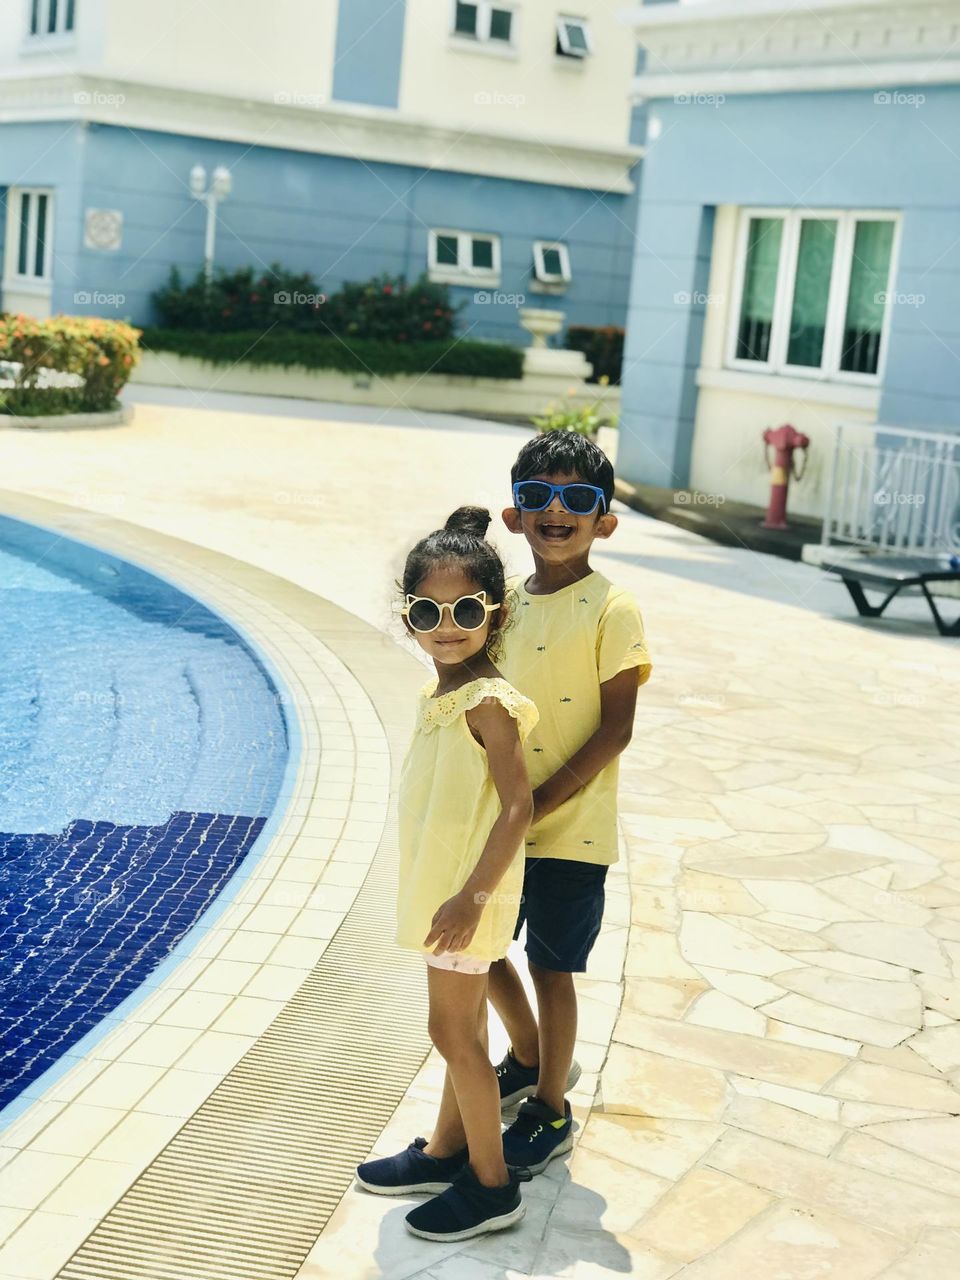 Two kids stand near swimming pool and both wear yellow summer outfits and sunglass.